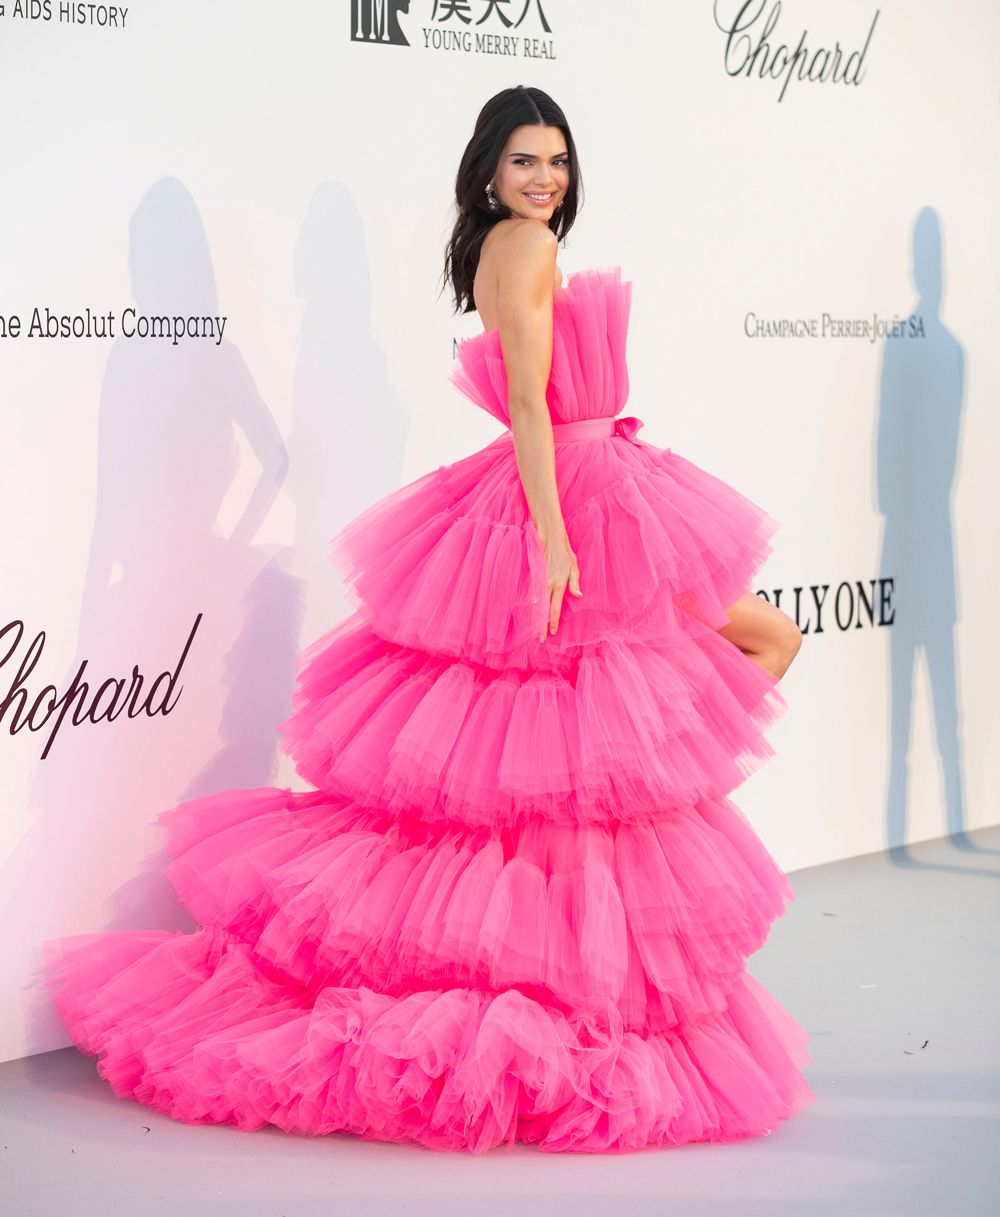 Buy > kendall jenner hot pink tulle dress > in stock